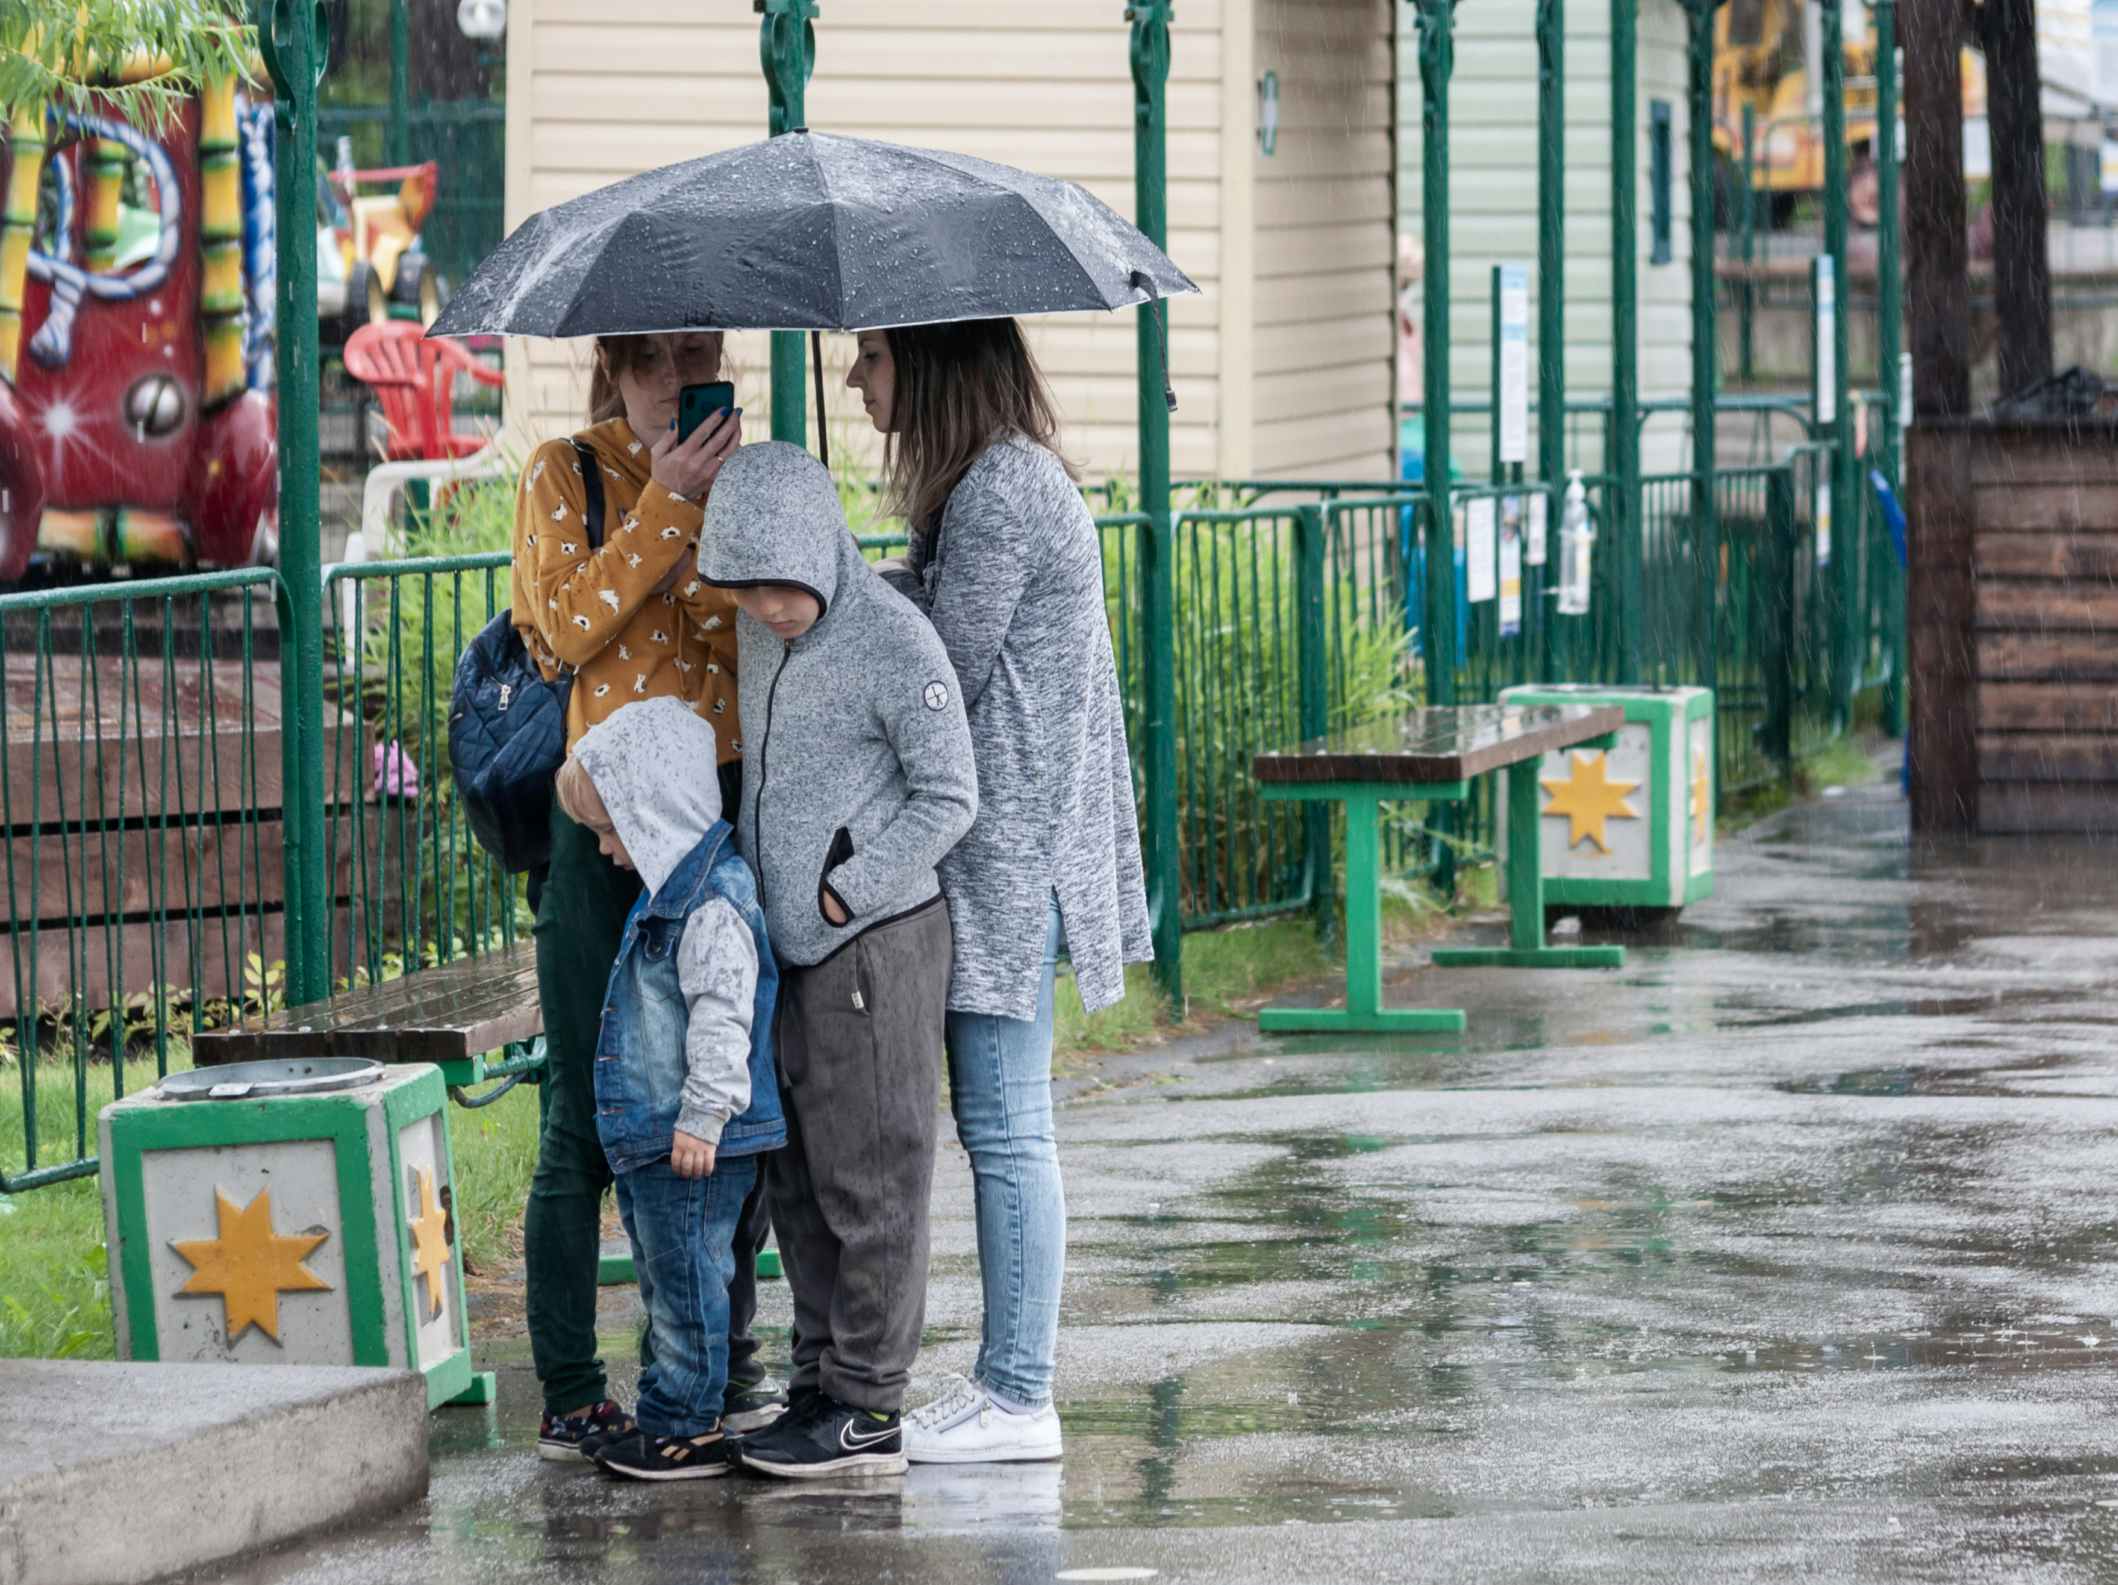 A family grouped under an umbrella on a rainy day at an amusement park.